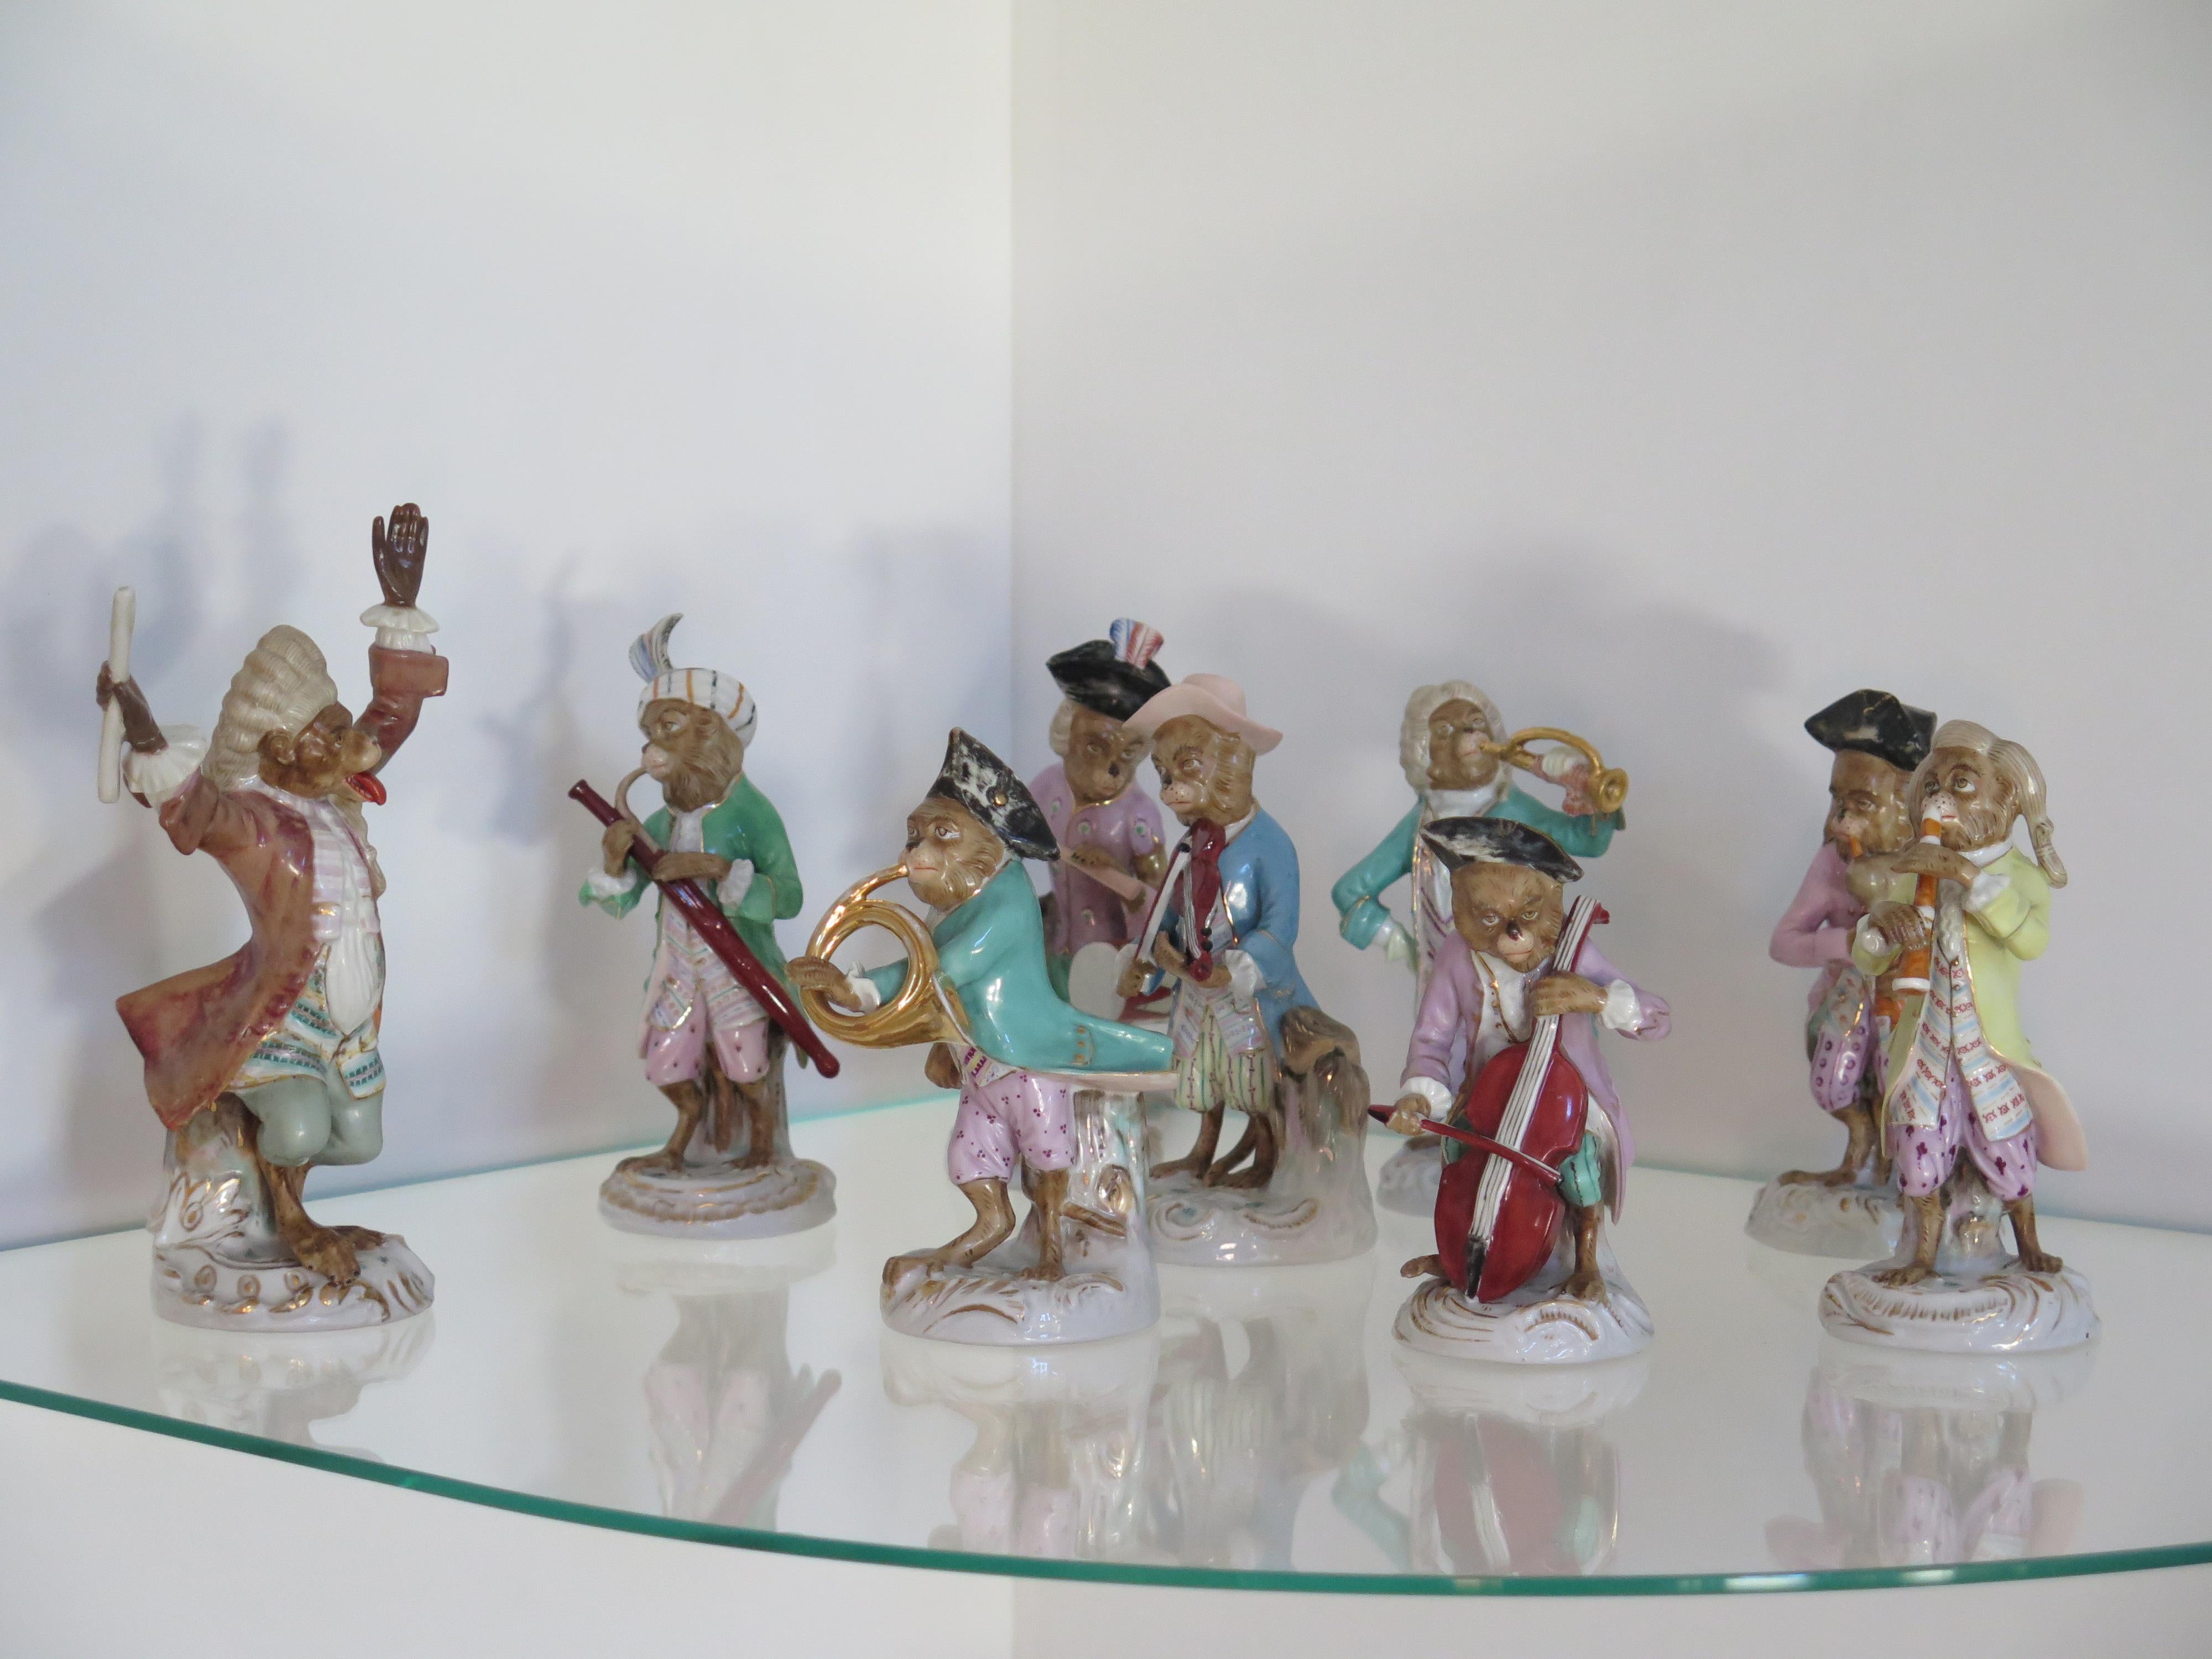 Monkey Figurine NINE-Piece Set Musical Band by Sitzendorf Porcelain, Circa 1910 In Good Condition For Sale In Lincoln, Lincolnshire